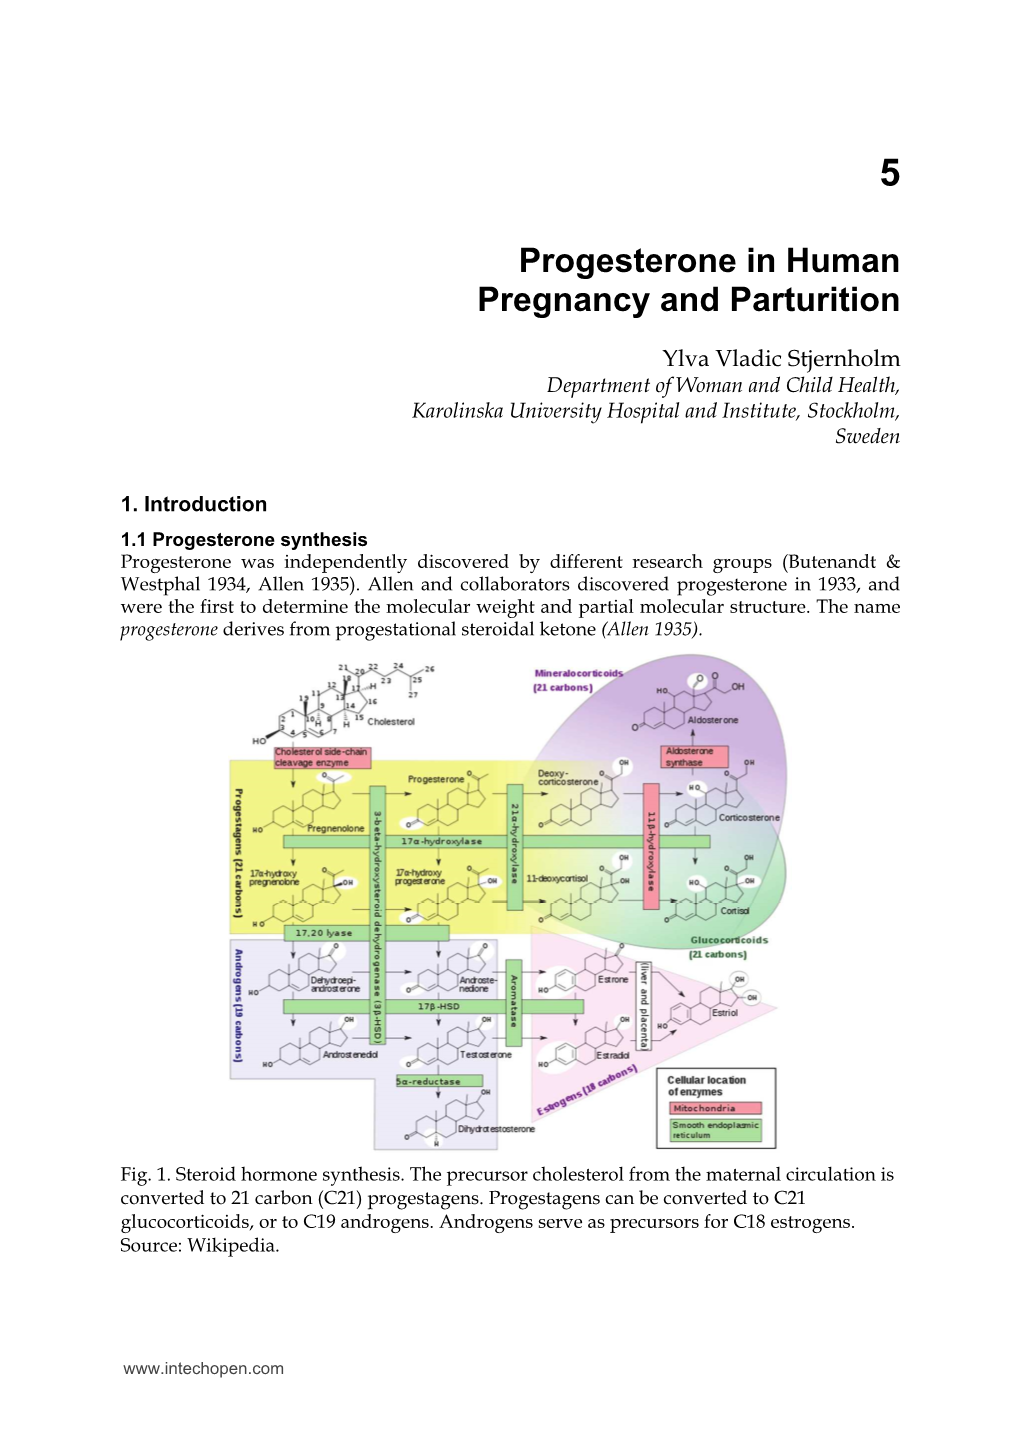 Progesterone in Human Pregnancy and Parturition